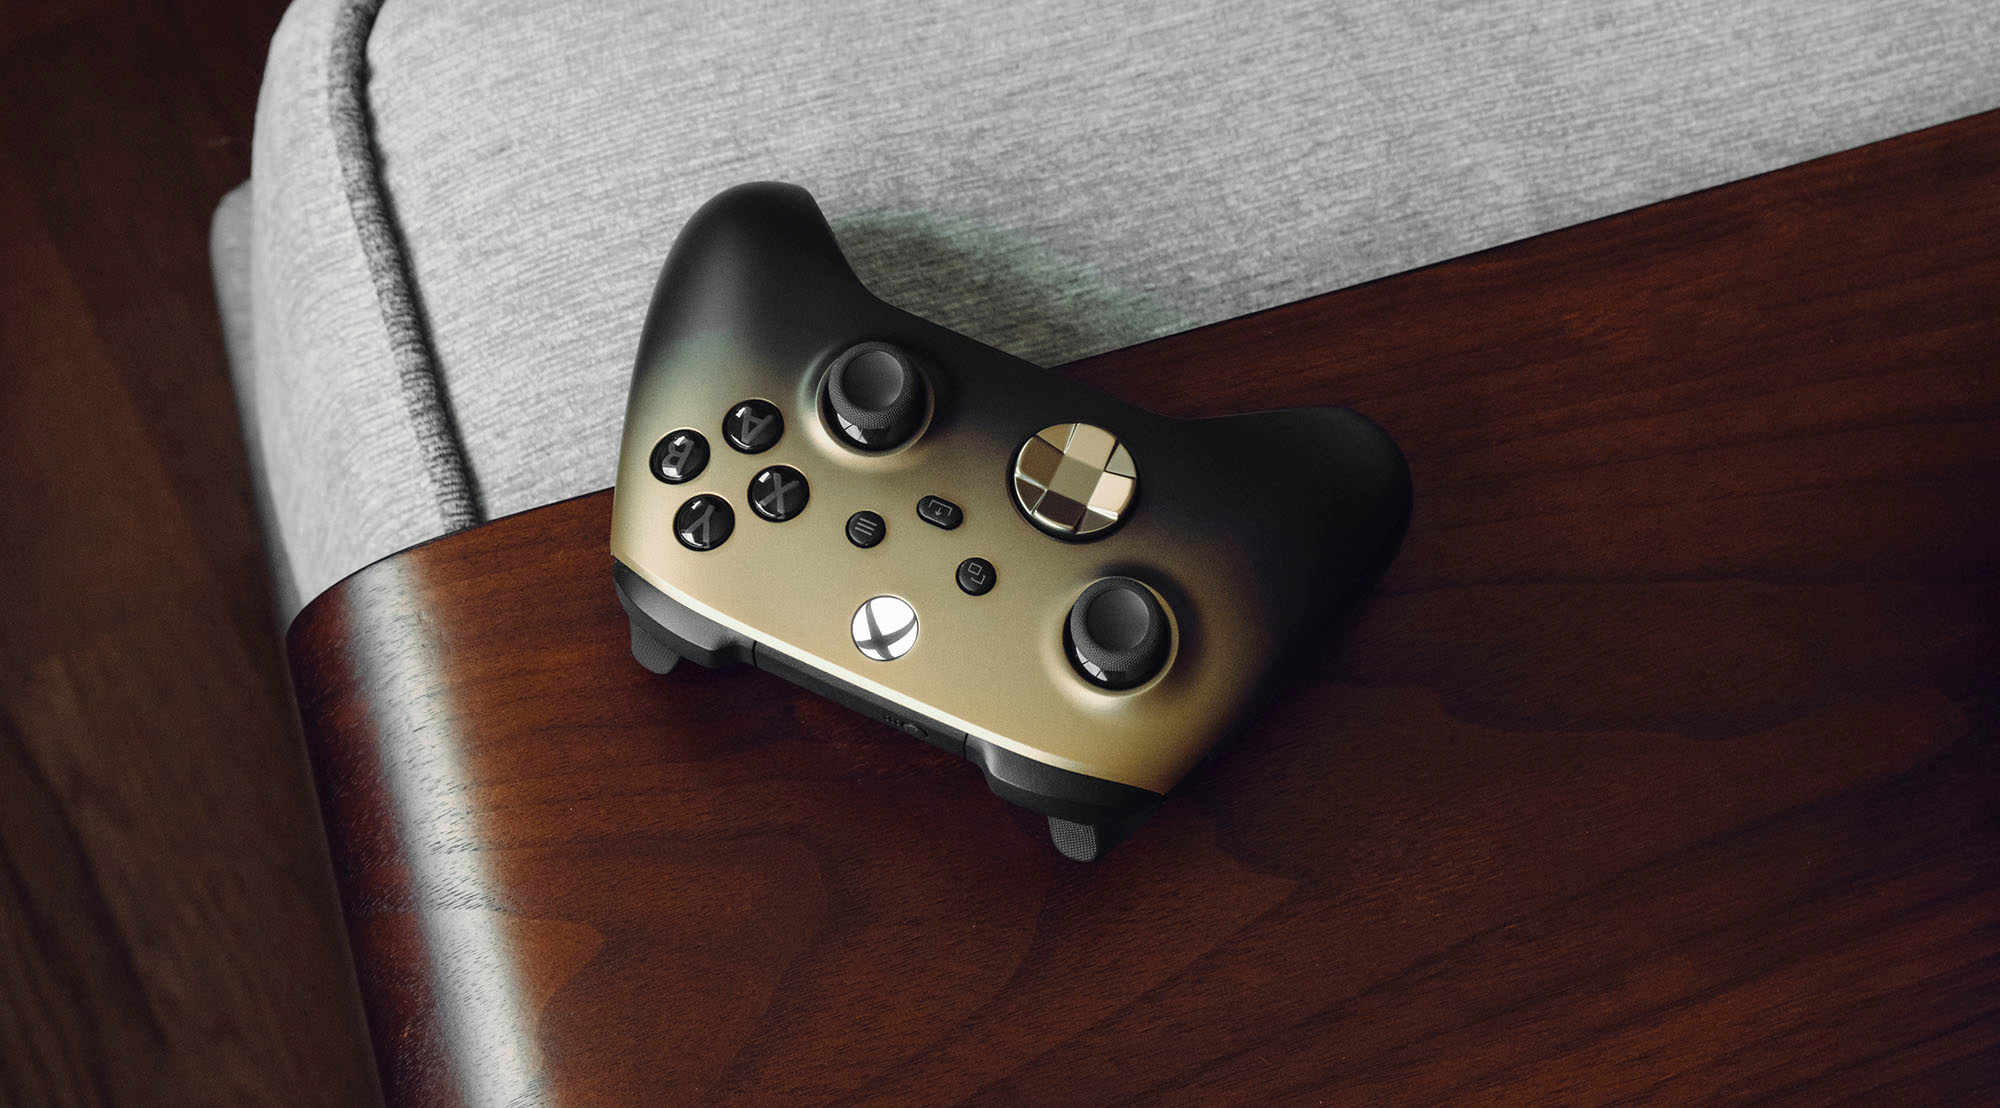 Xbox Wireless Controller – Gold Shadow Special Edition